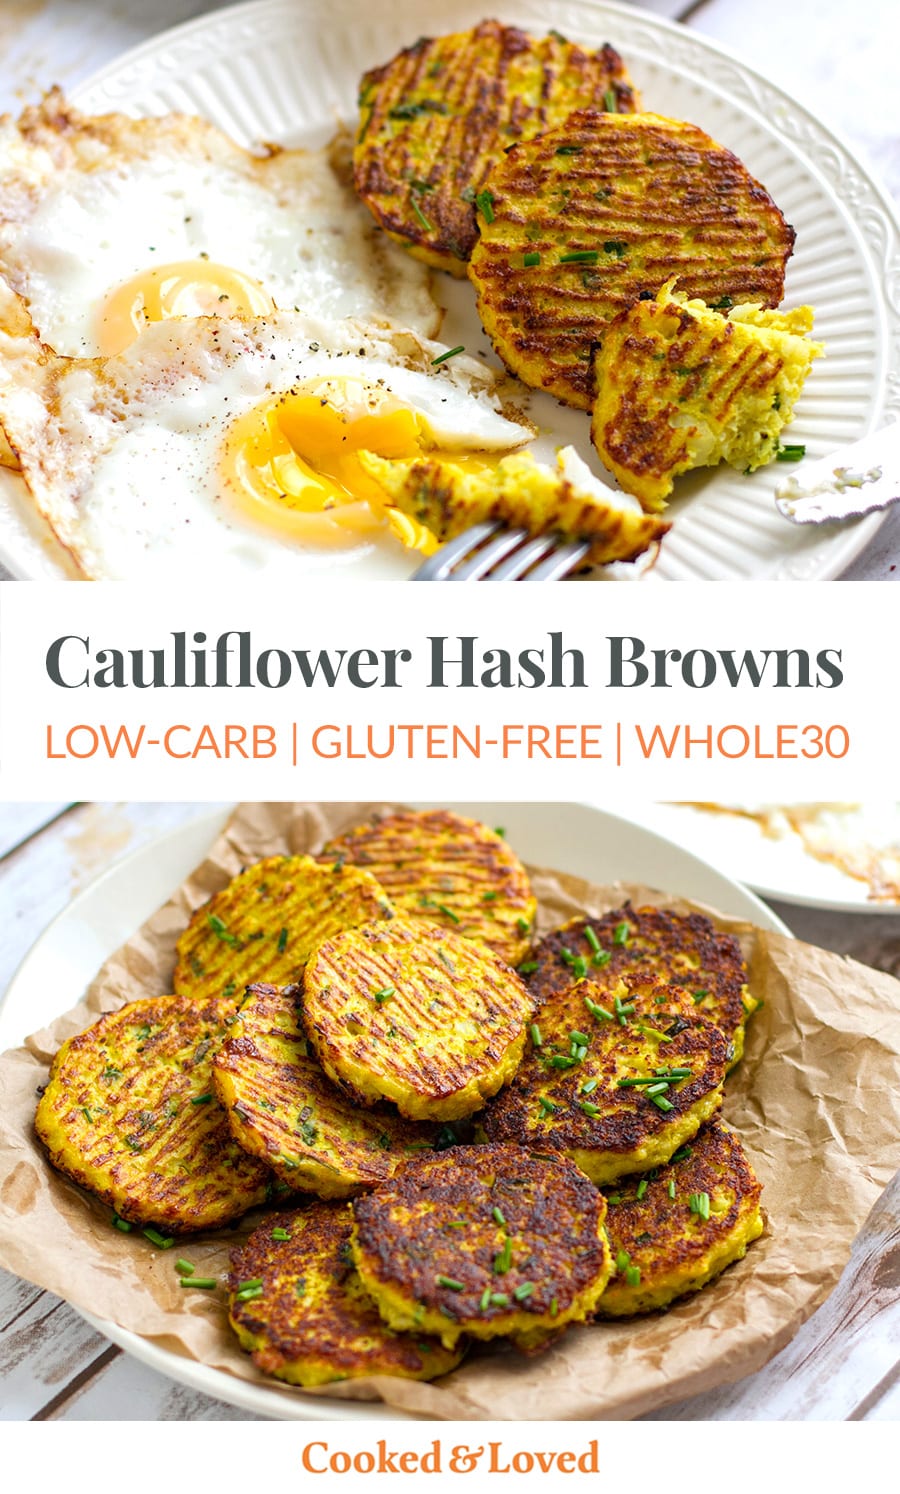 Cauliflower Hash Browns (Low-Carb, Gluten-free, Whole30)